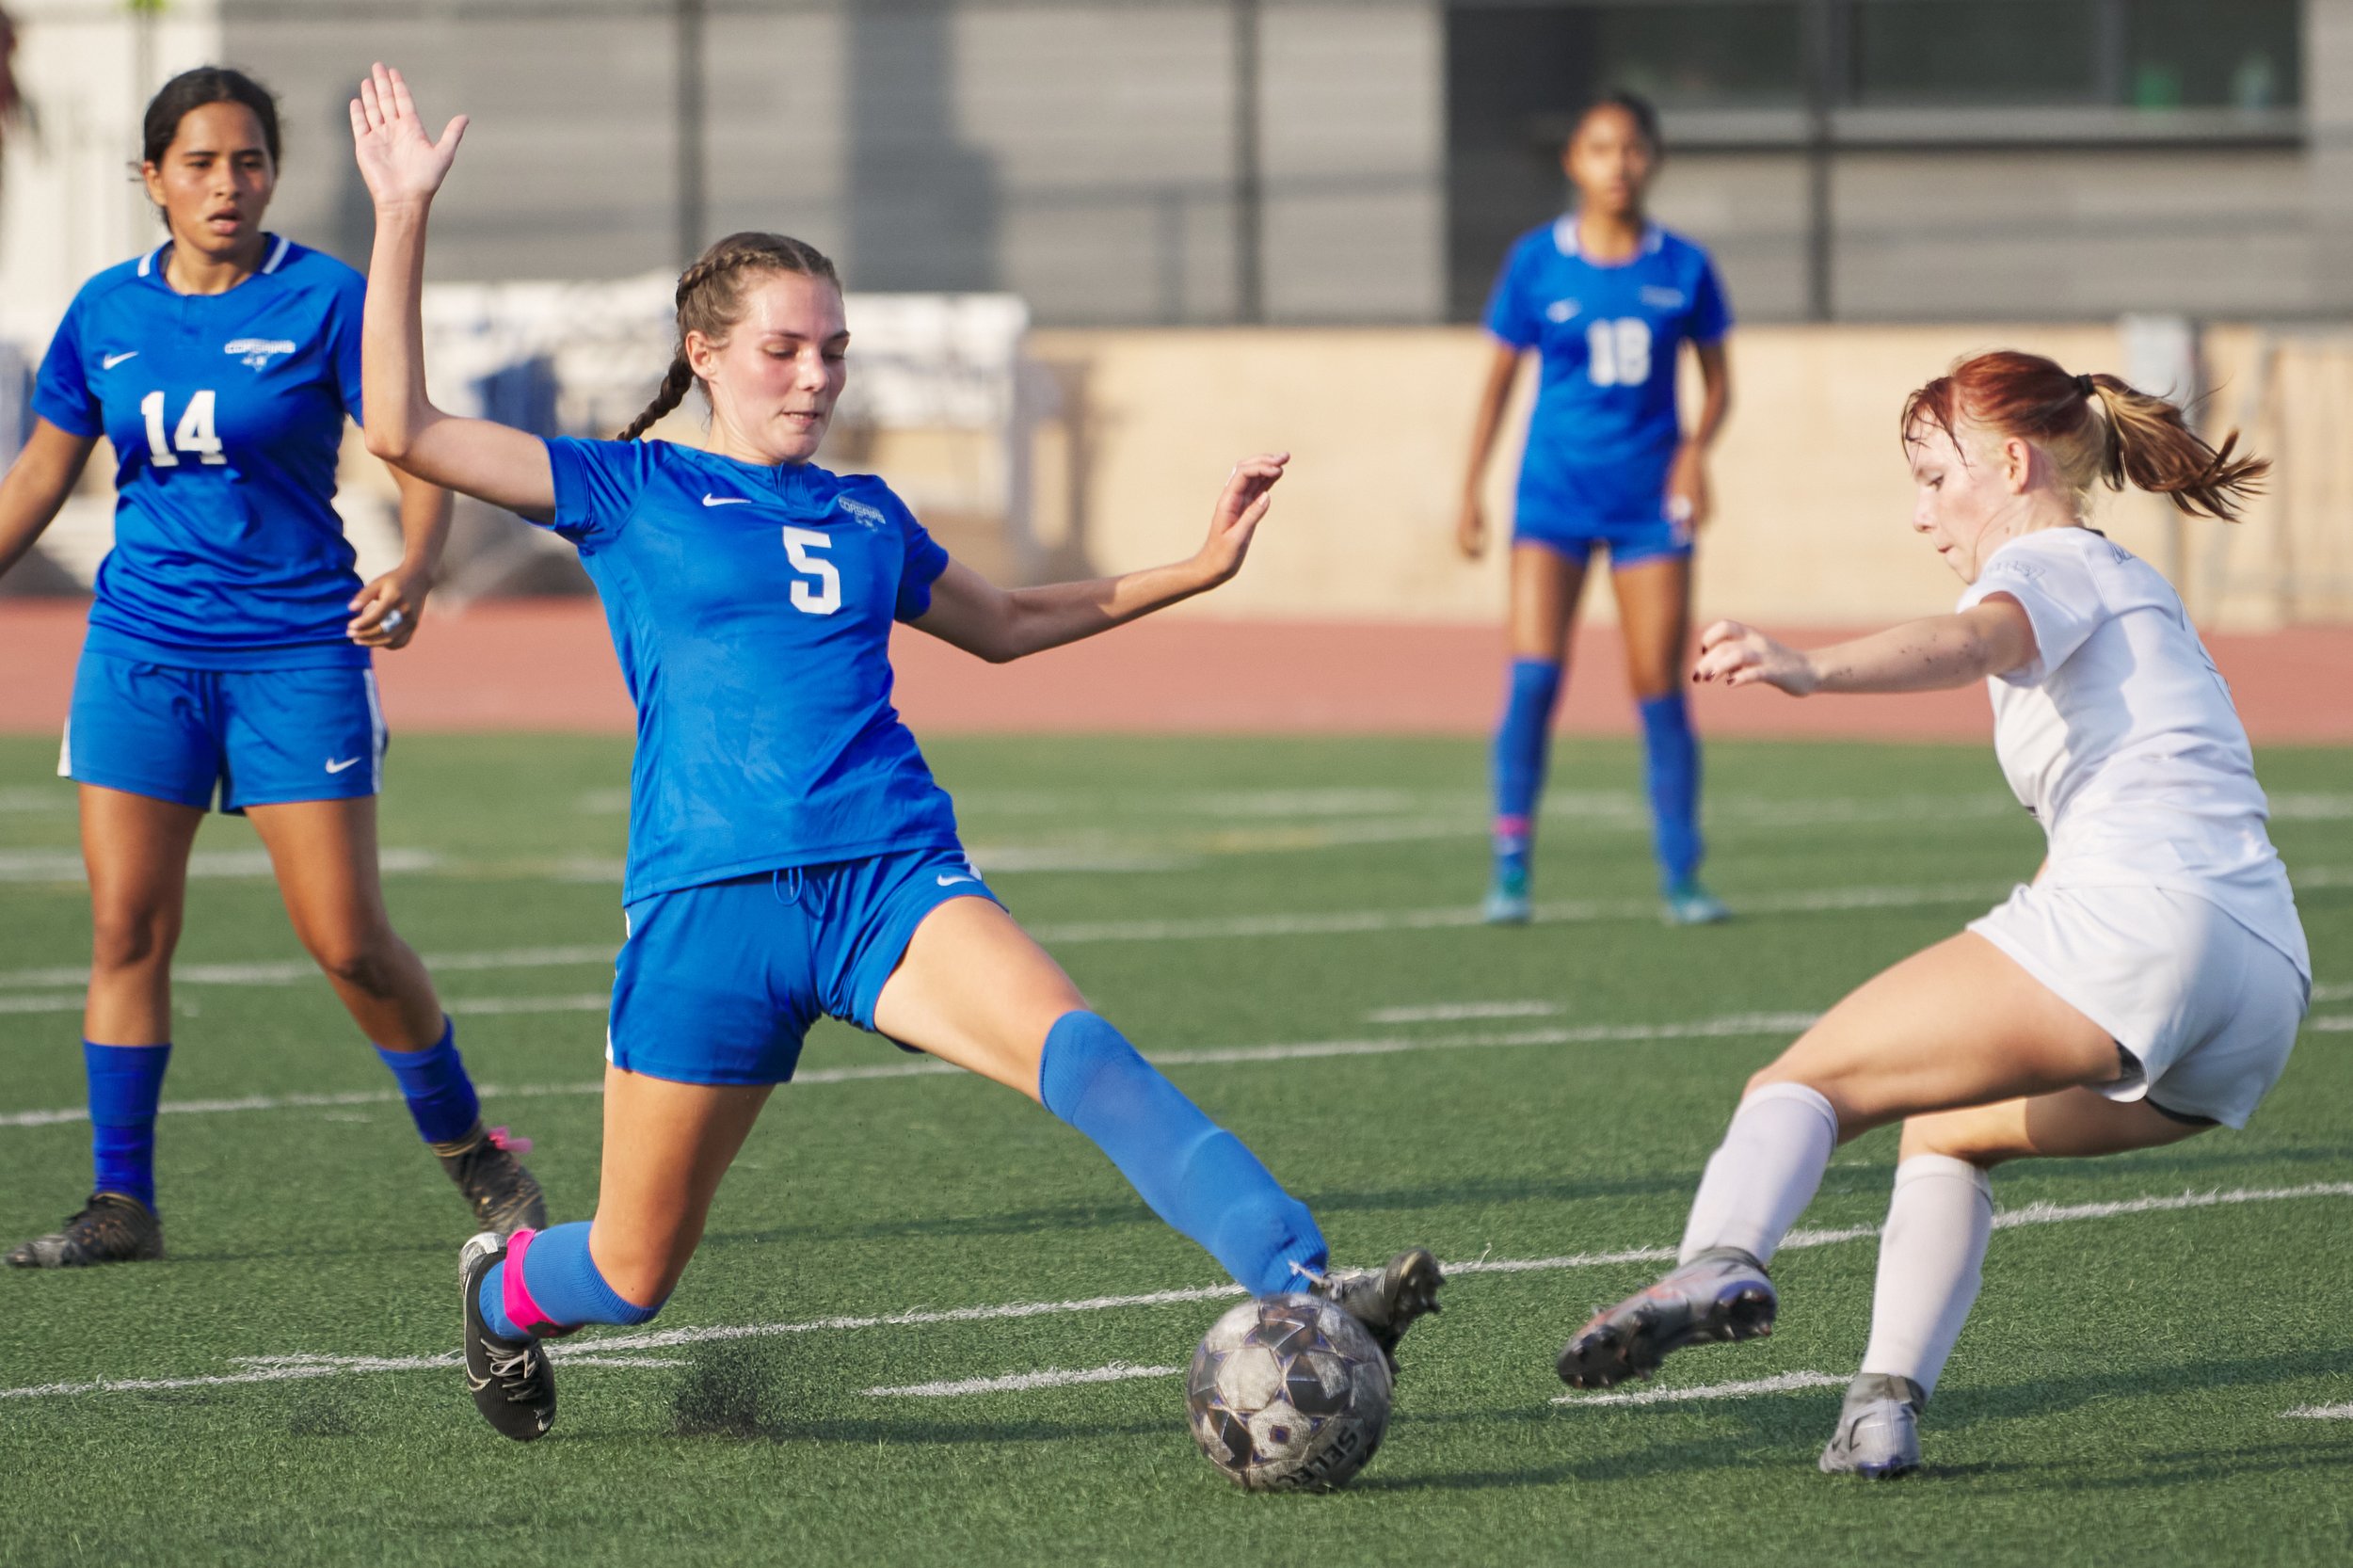  Santa Monica College Corsairs' Charlie Kayem (center) attempts to keep the ball from Antelope Valley College Marauders' Megan Salvesvold (right) during the women's soccer match on Tuesday, Oct. 11, 2022, at Corsair Field in Santa Monica, Calif. The 